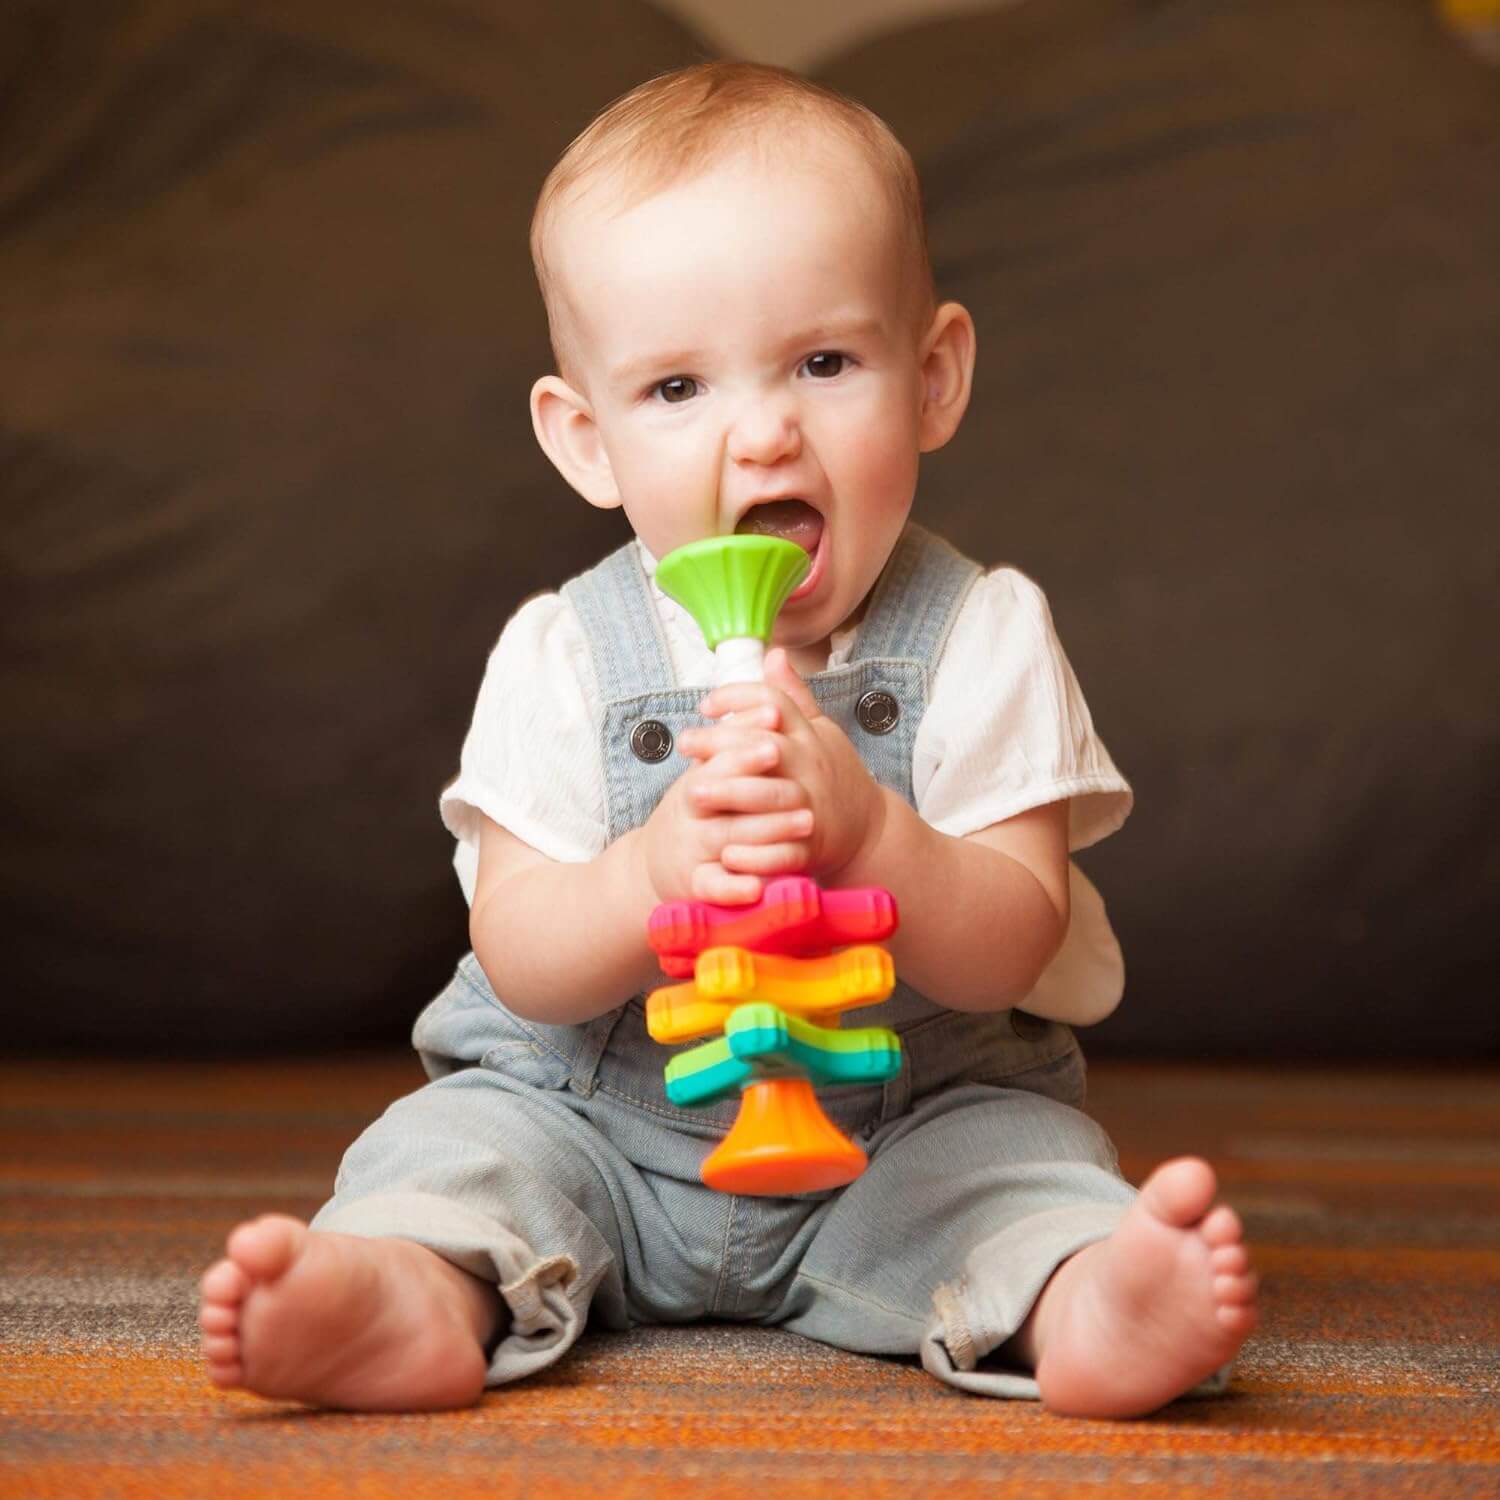 A baby puts the MiniSpinny up to their mouth.